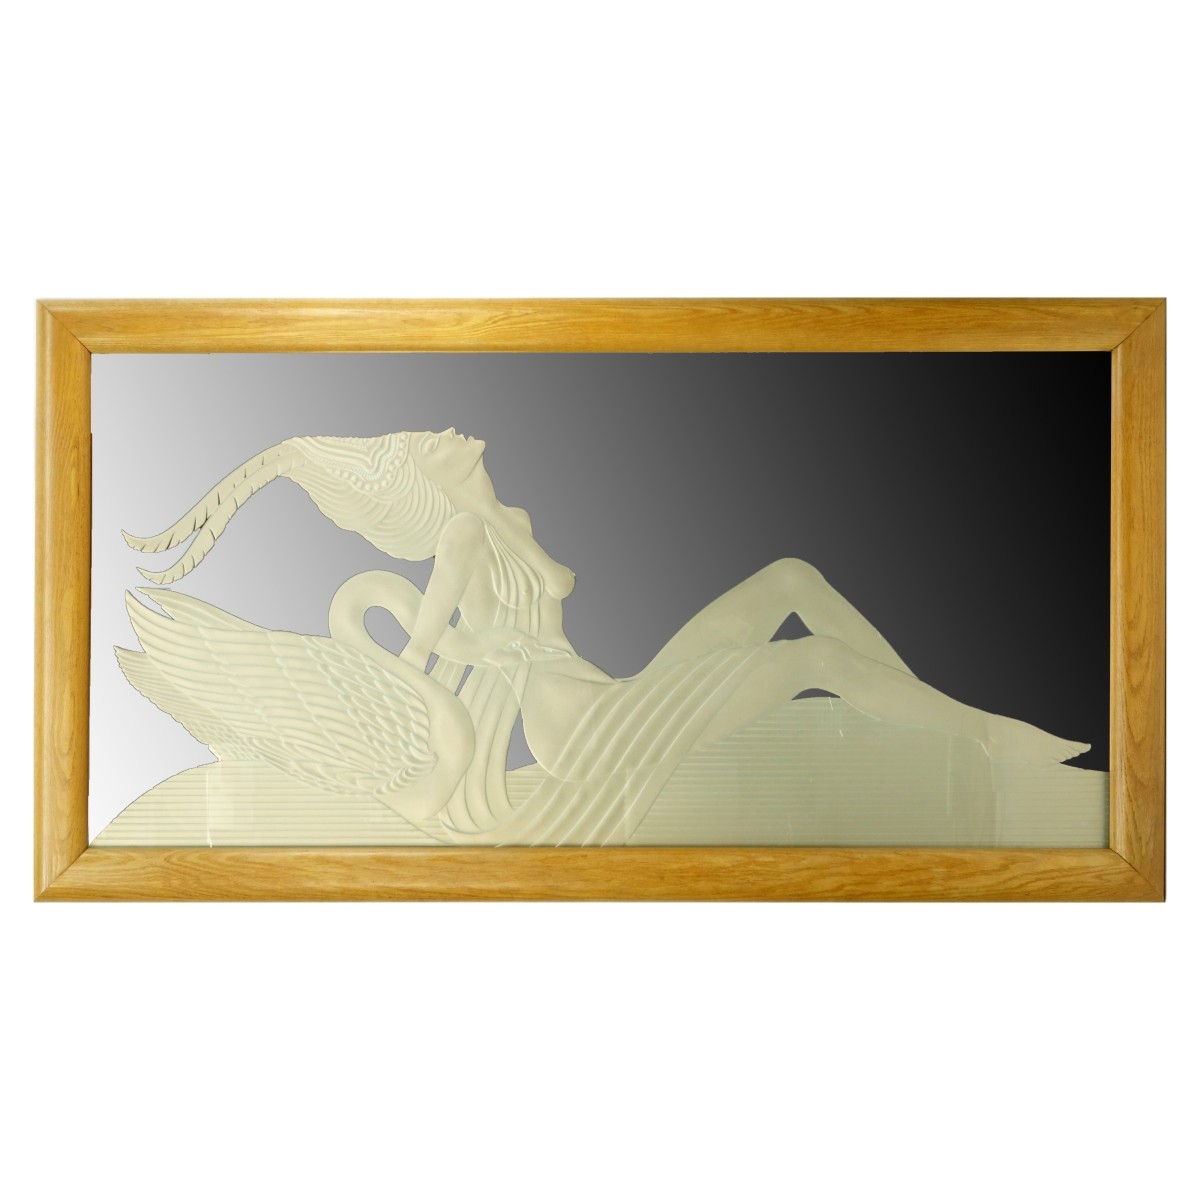 Bolae Etched Glass Wall Hanging